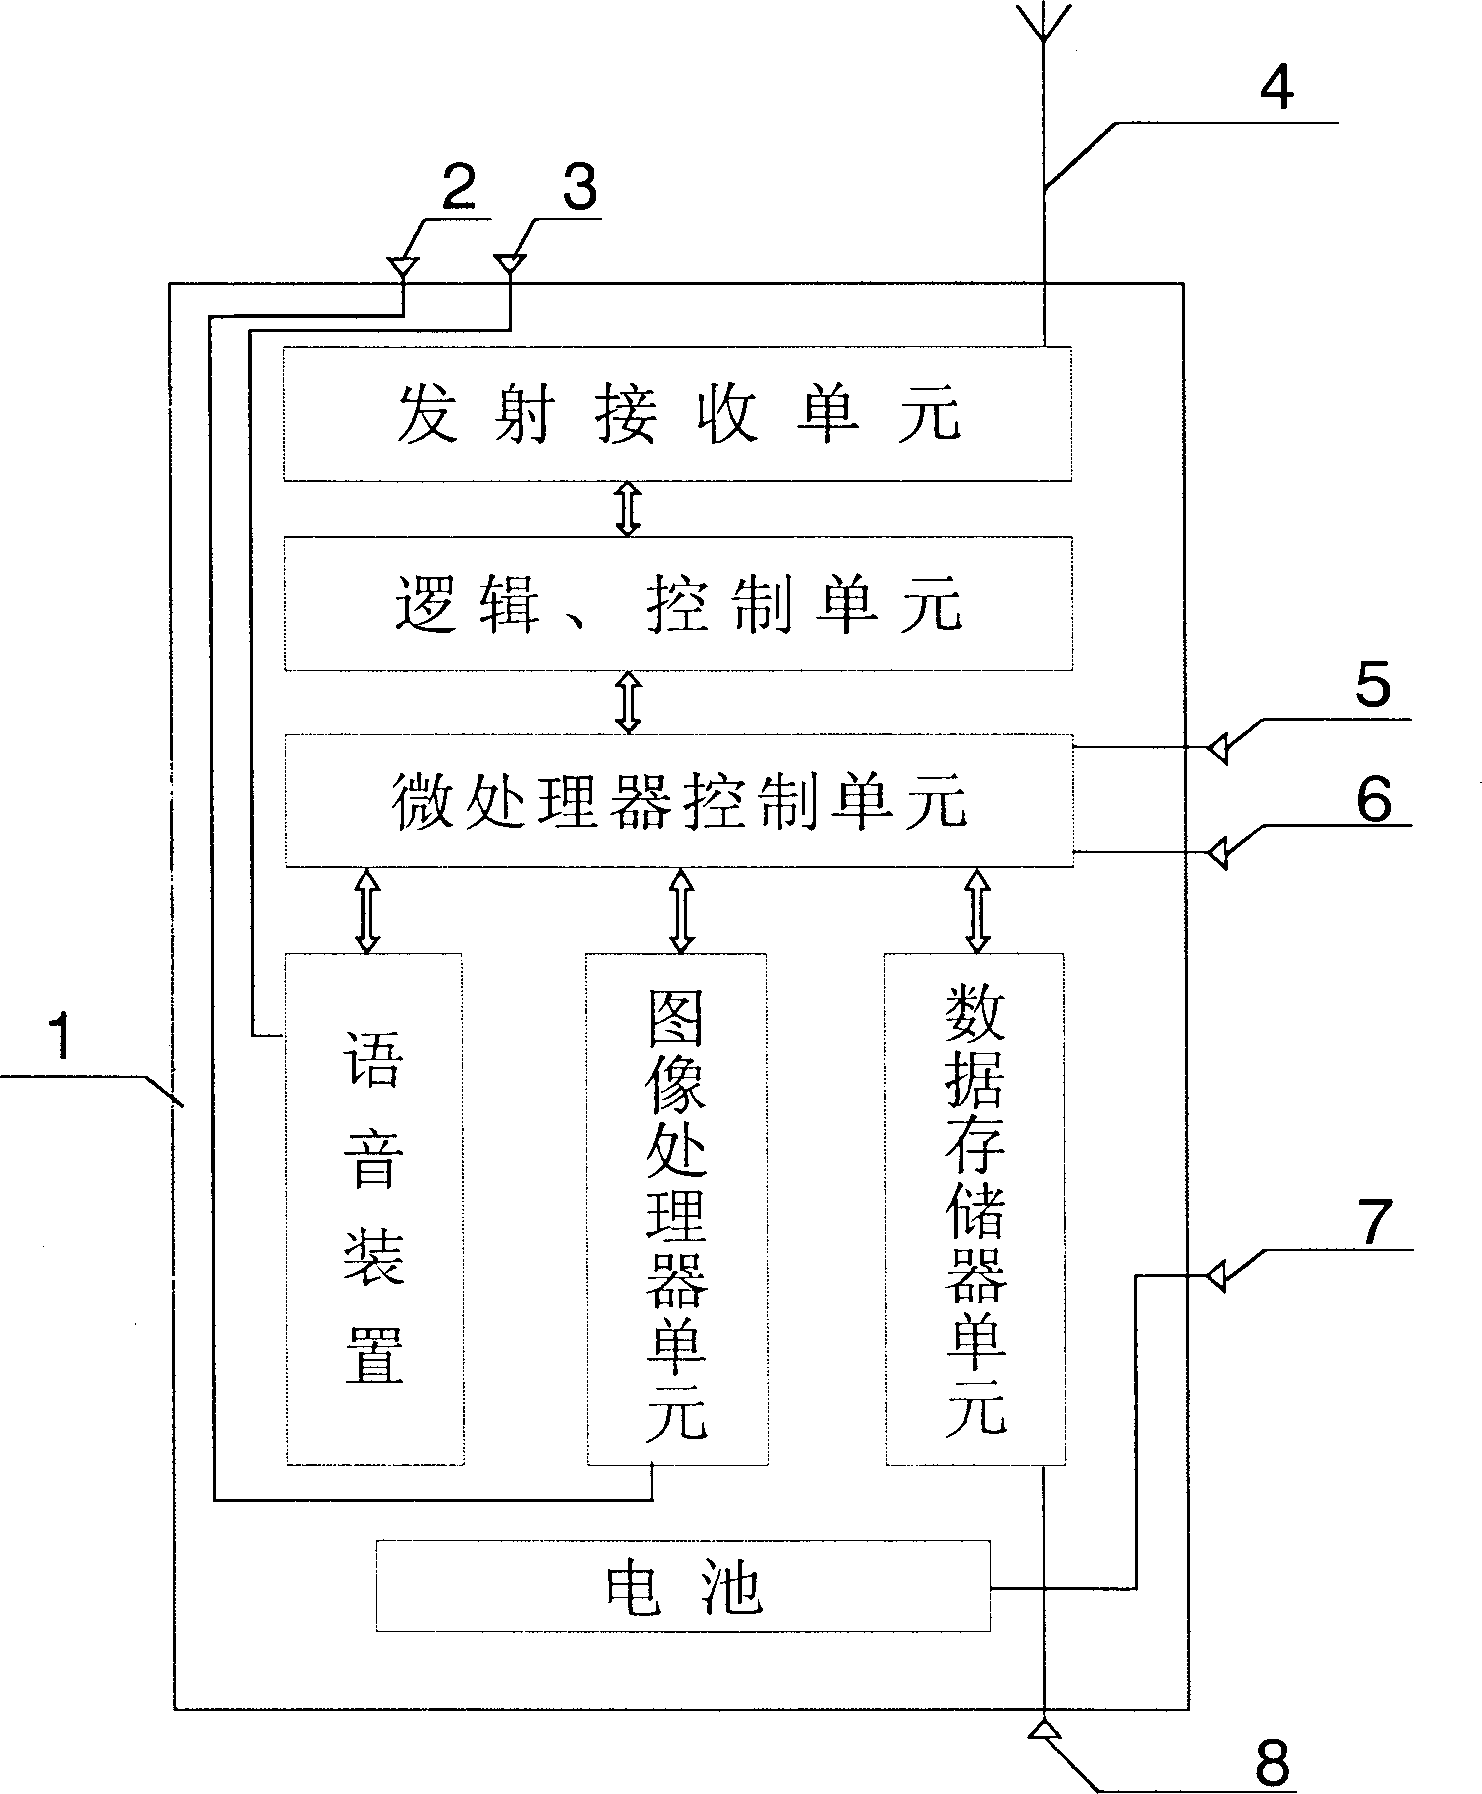 Method and device for tracking and monitoring alarm using mobile telecommunication network and mobile phone